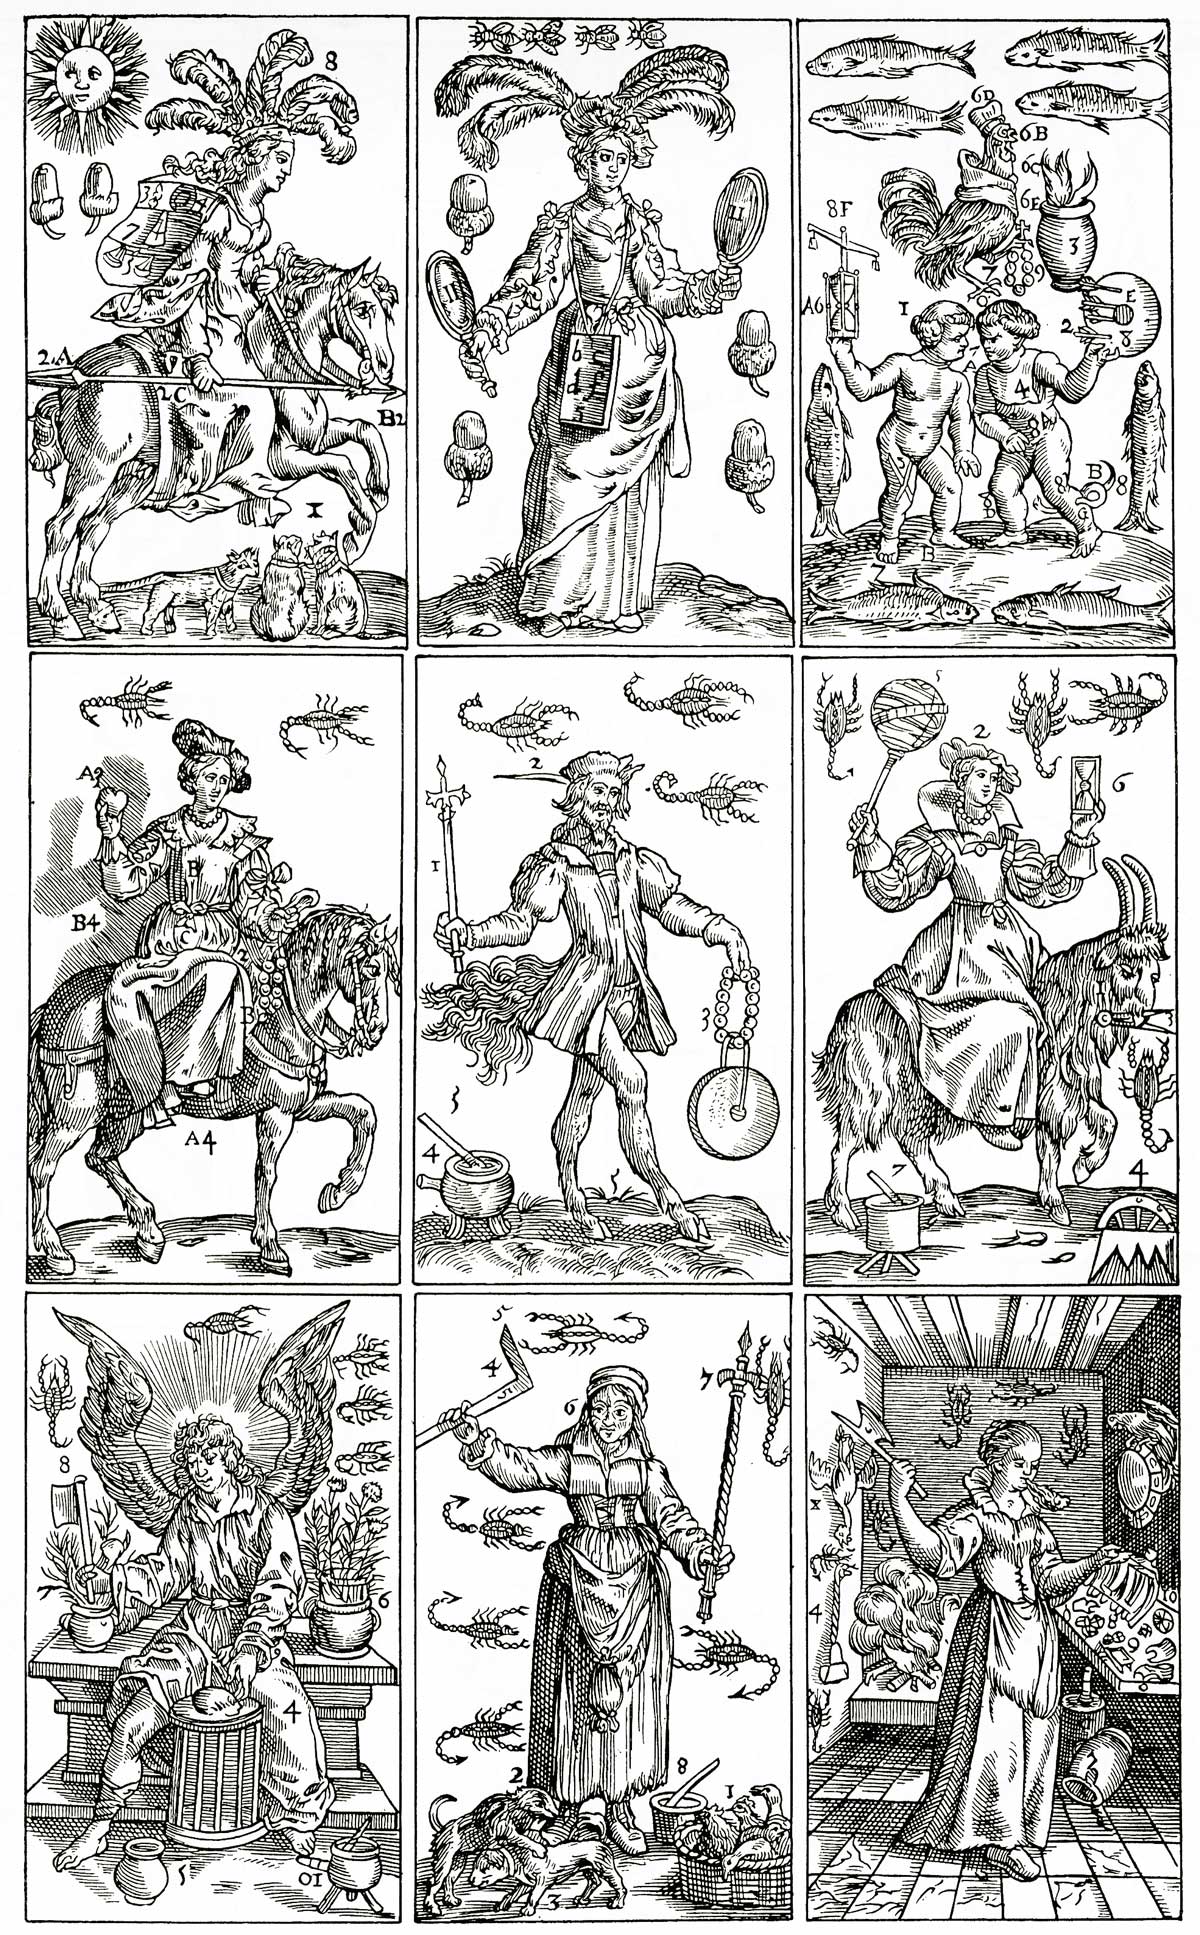 Logica Memorativa Playing Cards by Thomas Murner (1507)